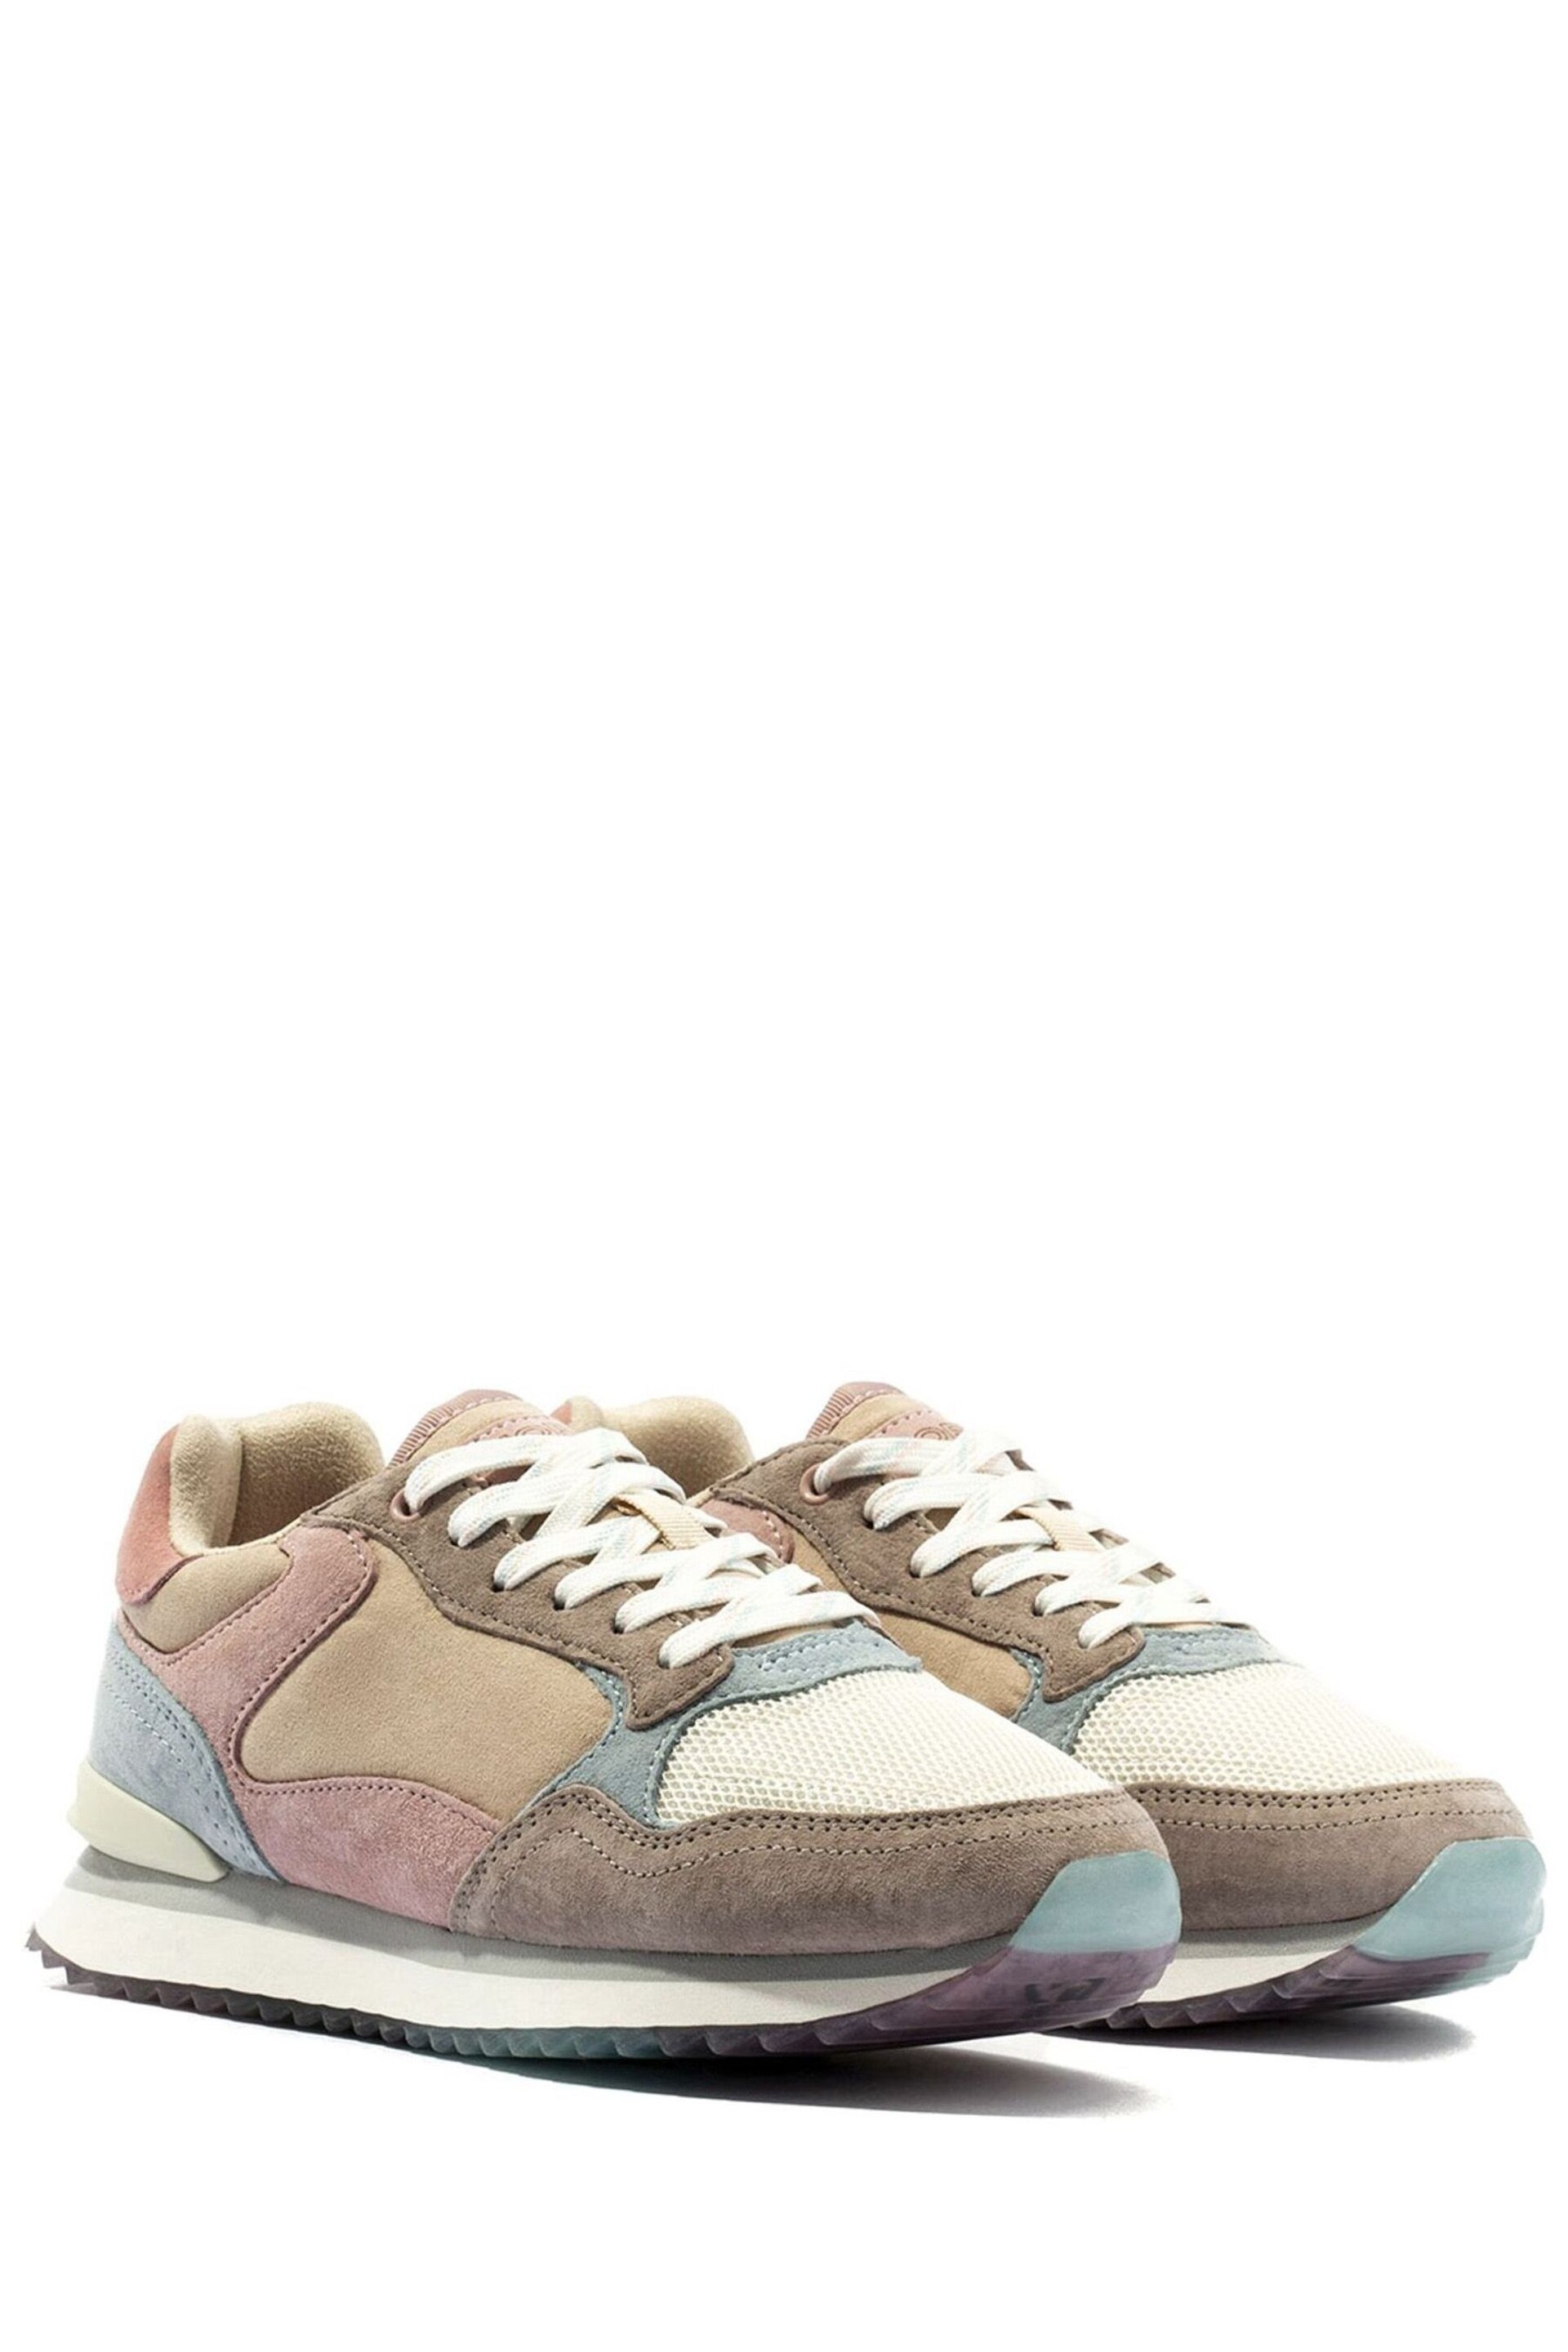 HOFF Barcelona Nude/Blue Suede Trainers - Image 2 of 5